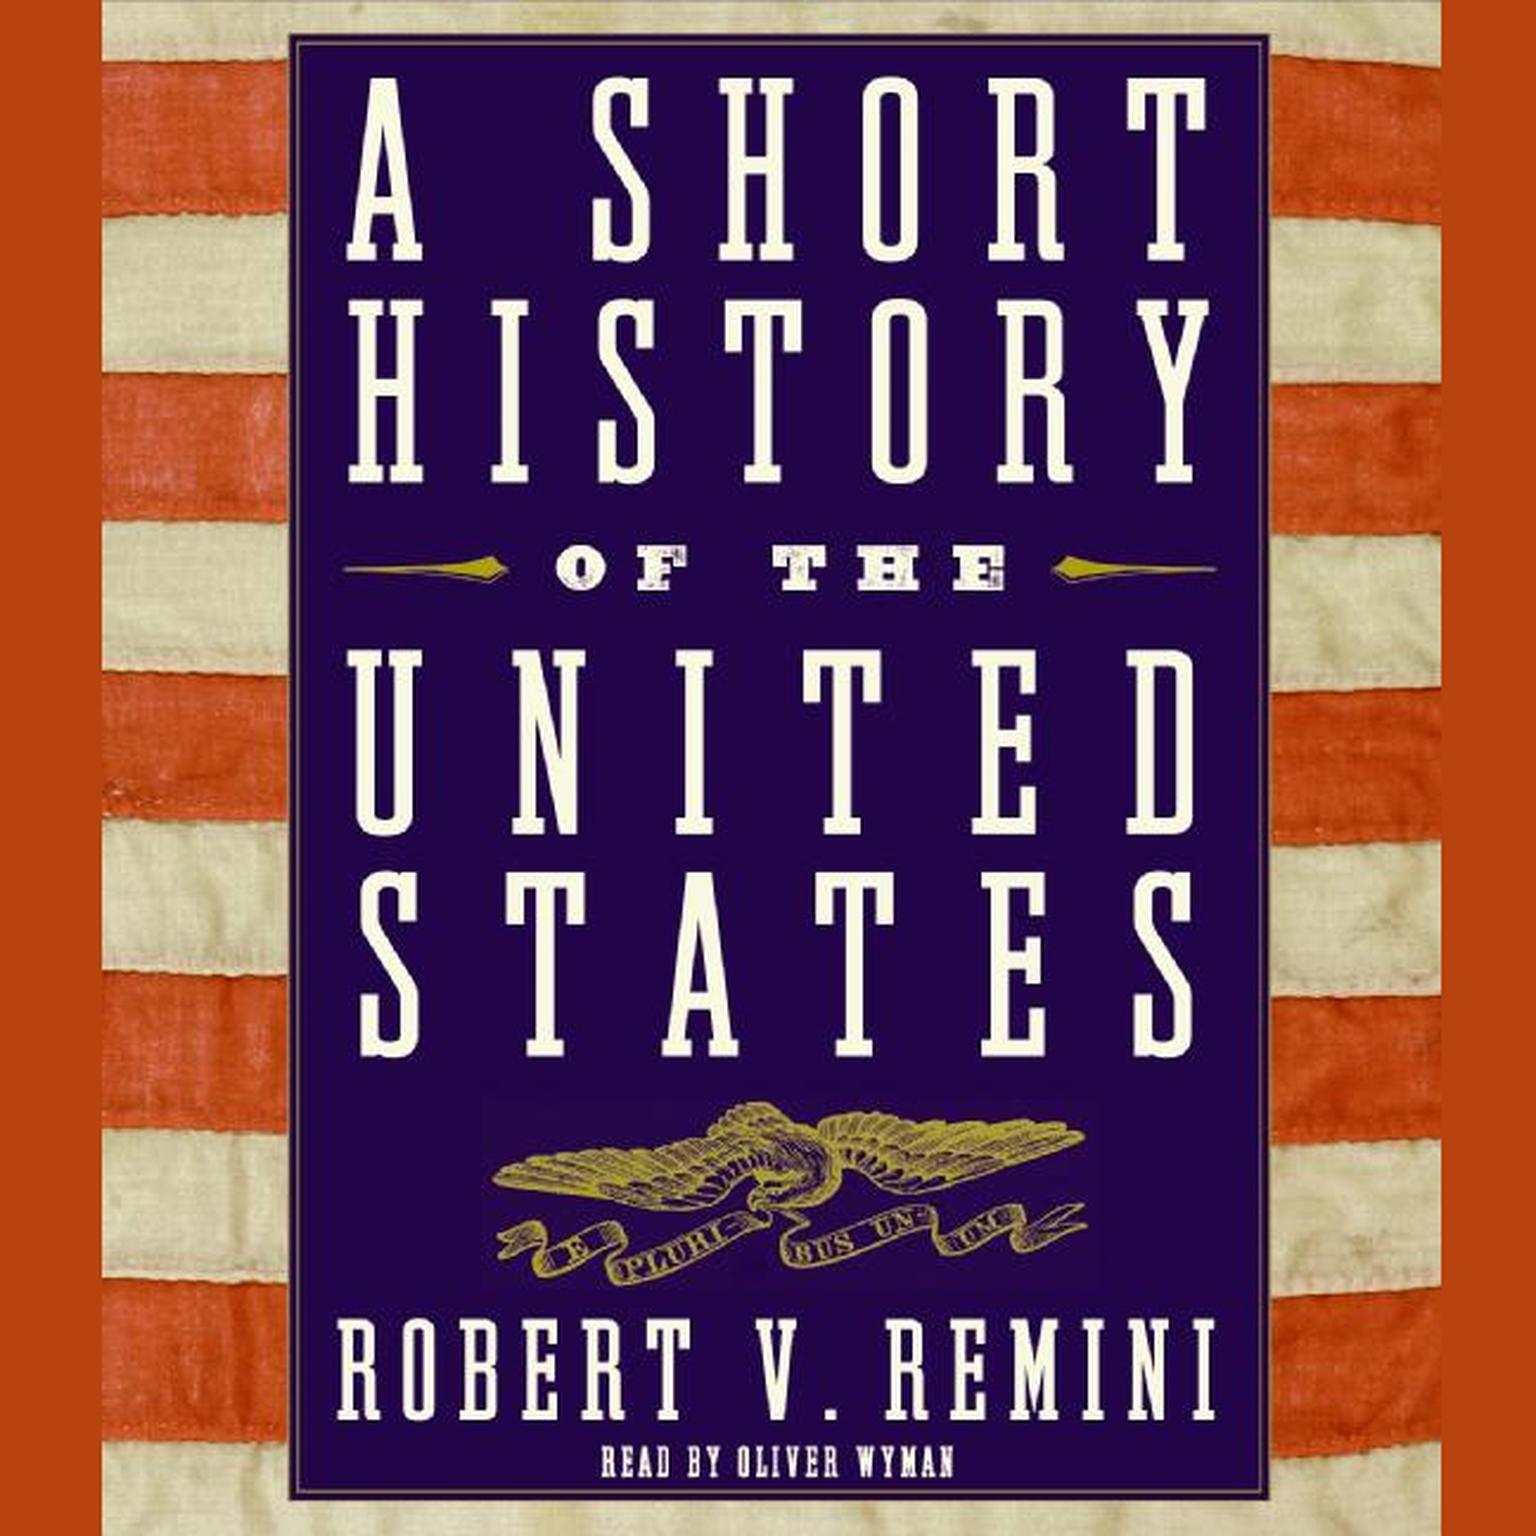 A Short History of the United States (Abridged) Audiobook, by Robert V. Remini